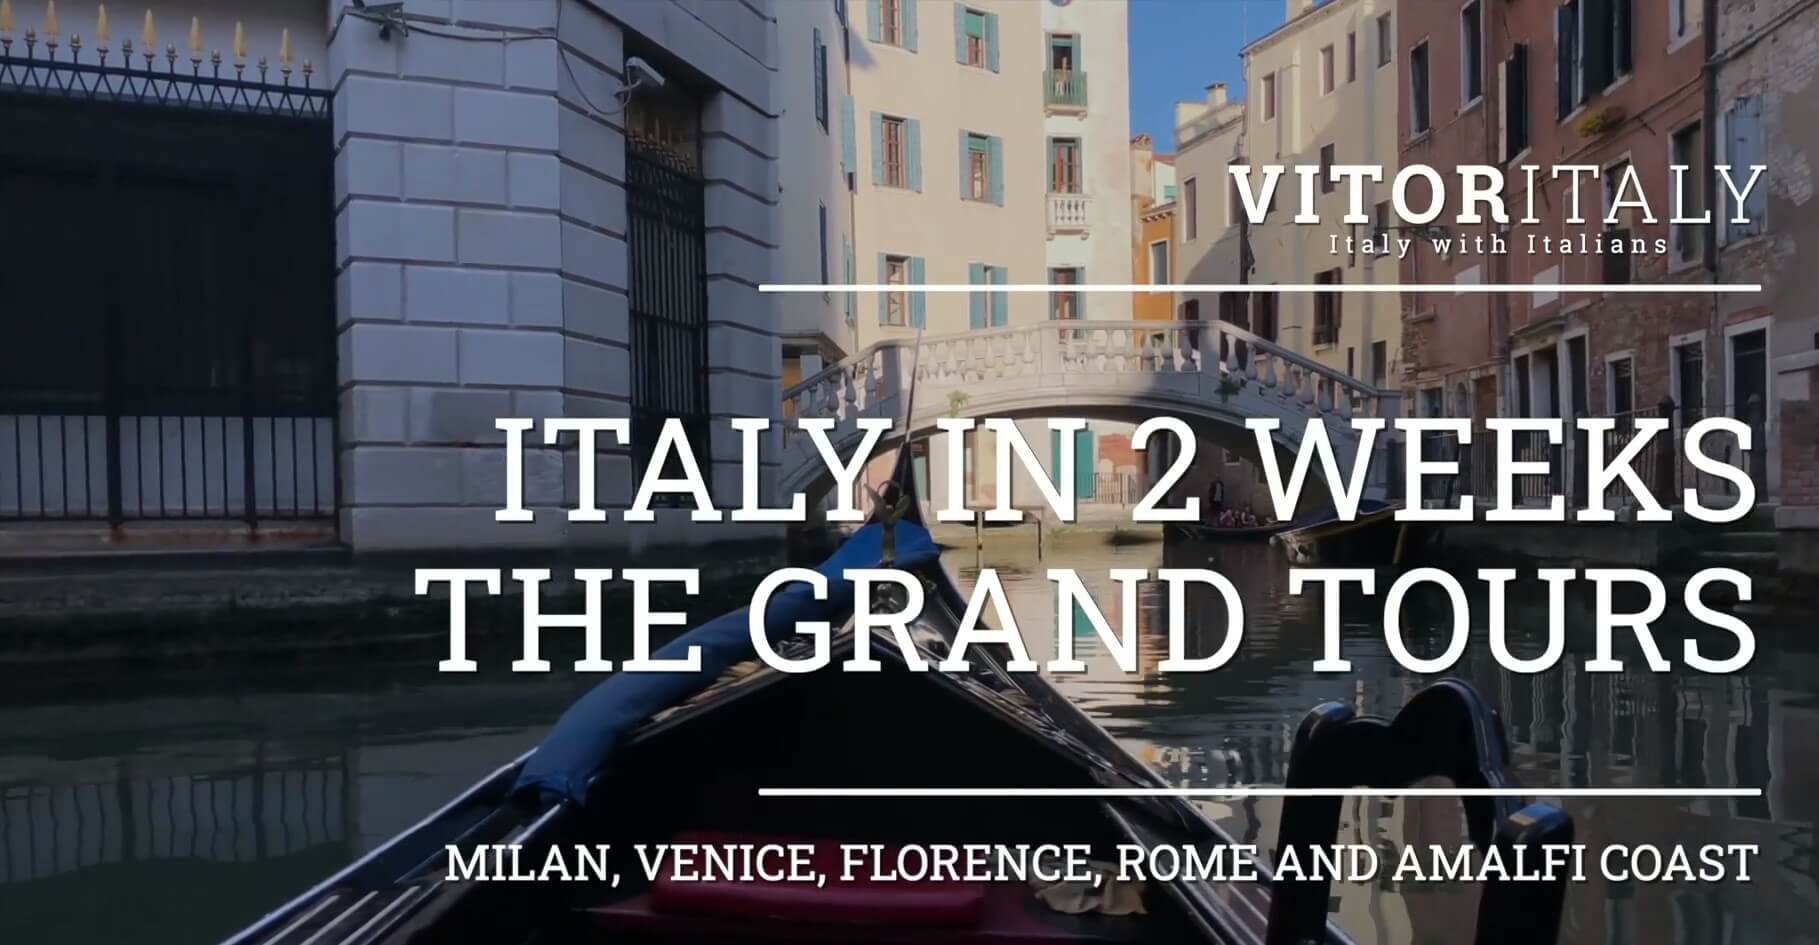 ITALY IN 2 WEEKS – THE GRAND TOURS Milan, Venice, Florence, Rome and Amalfi Coast